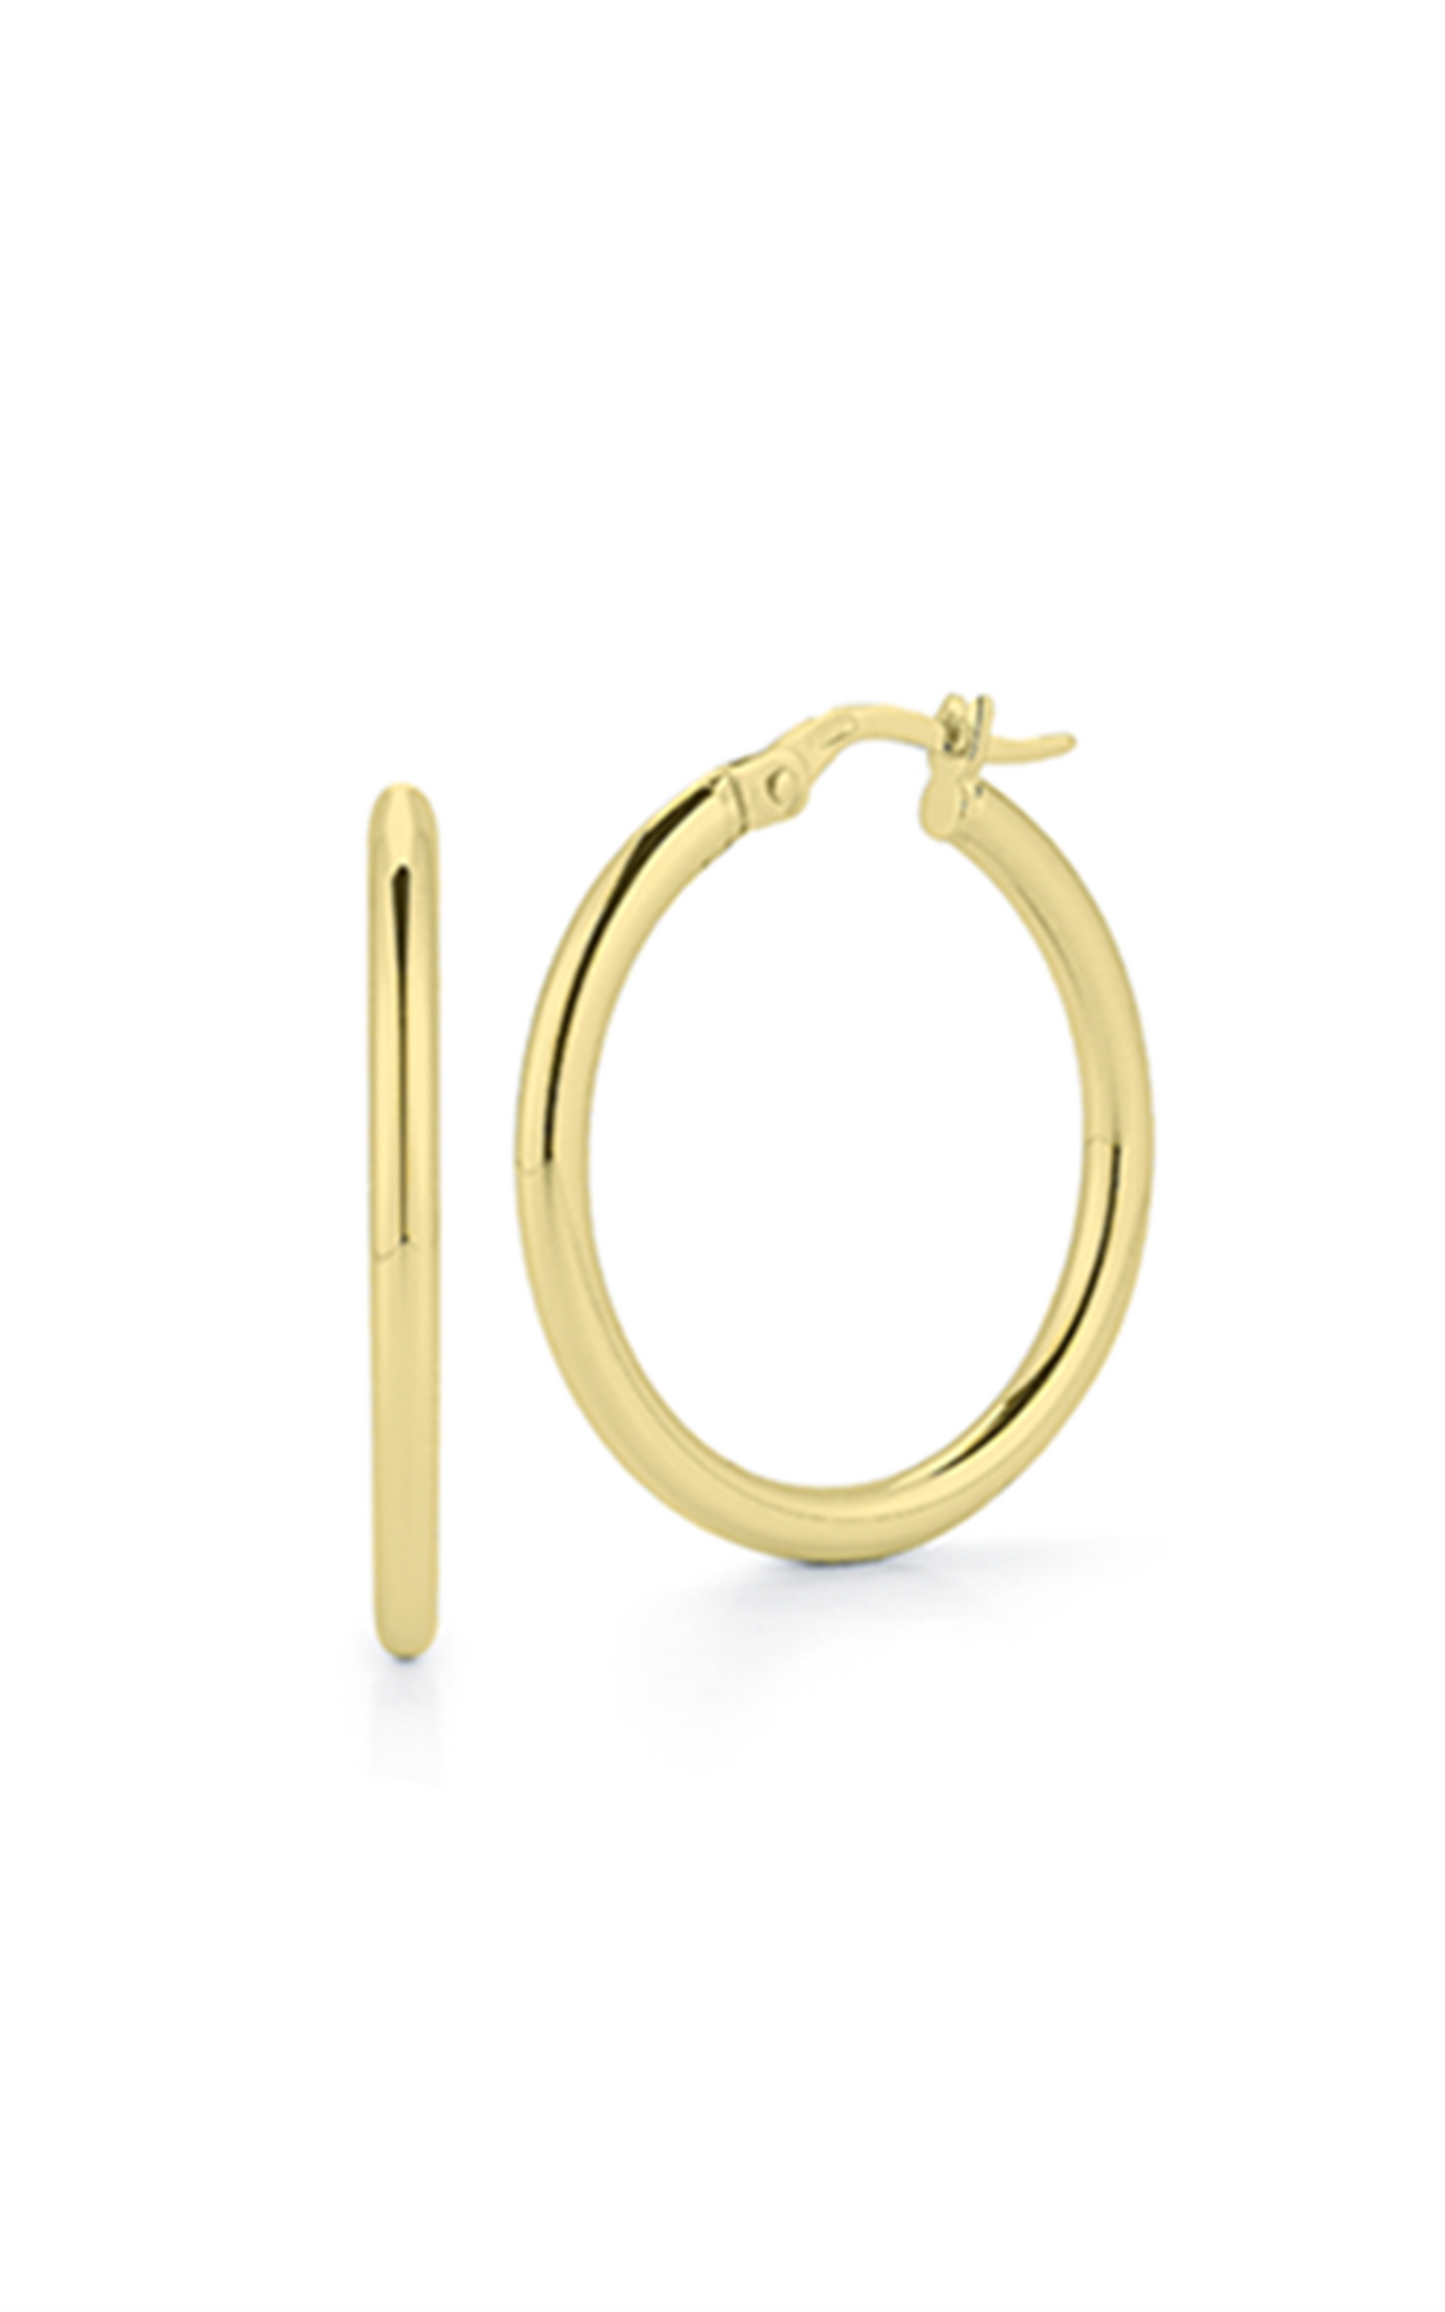 Roberto Coin Designer Gold Small Round Hoop Earrings